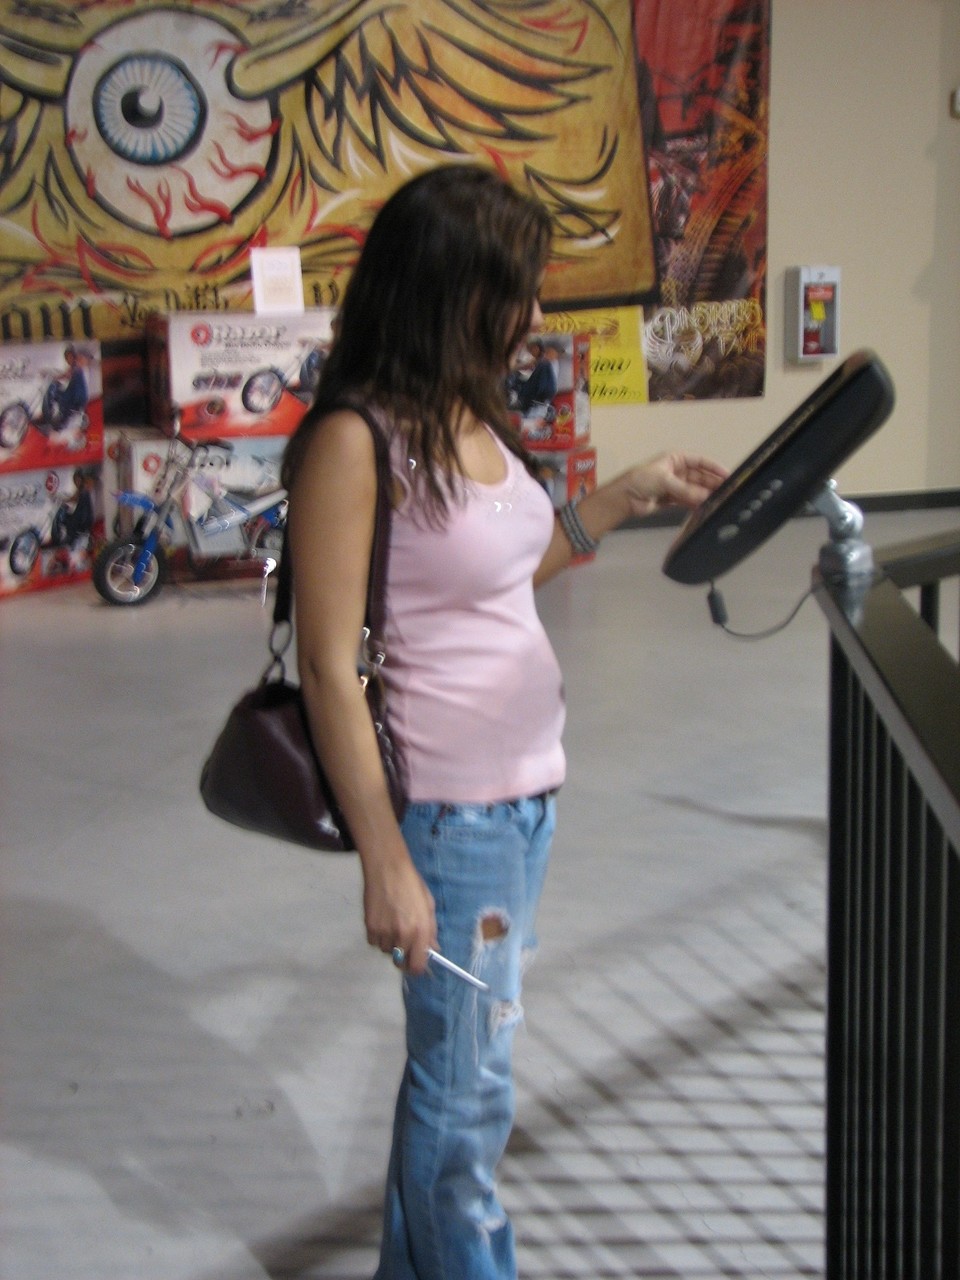 Amateur Katie in tight jeans flashes her big boobs with puffy nips in public porno foto #426861592 | Teen Girl Photos Pics, Amateur, mobiele porno